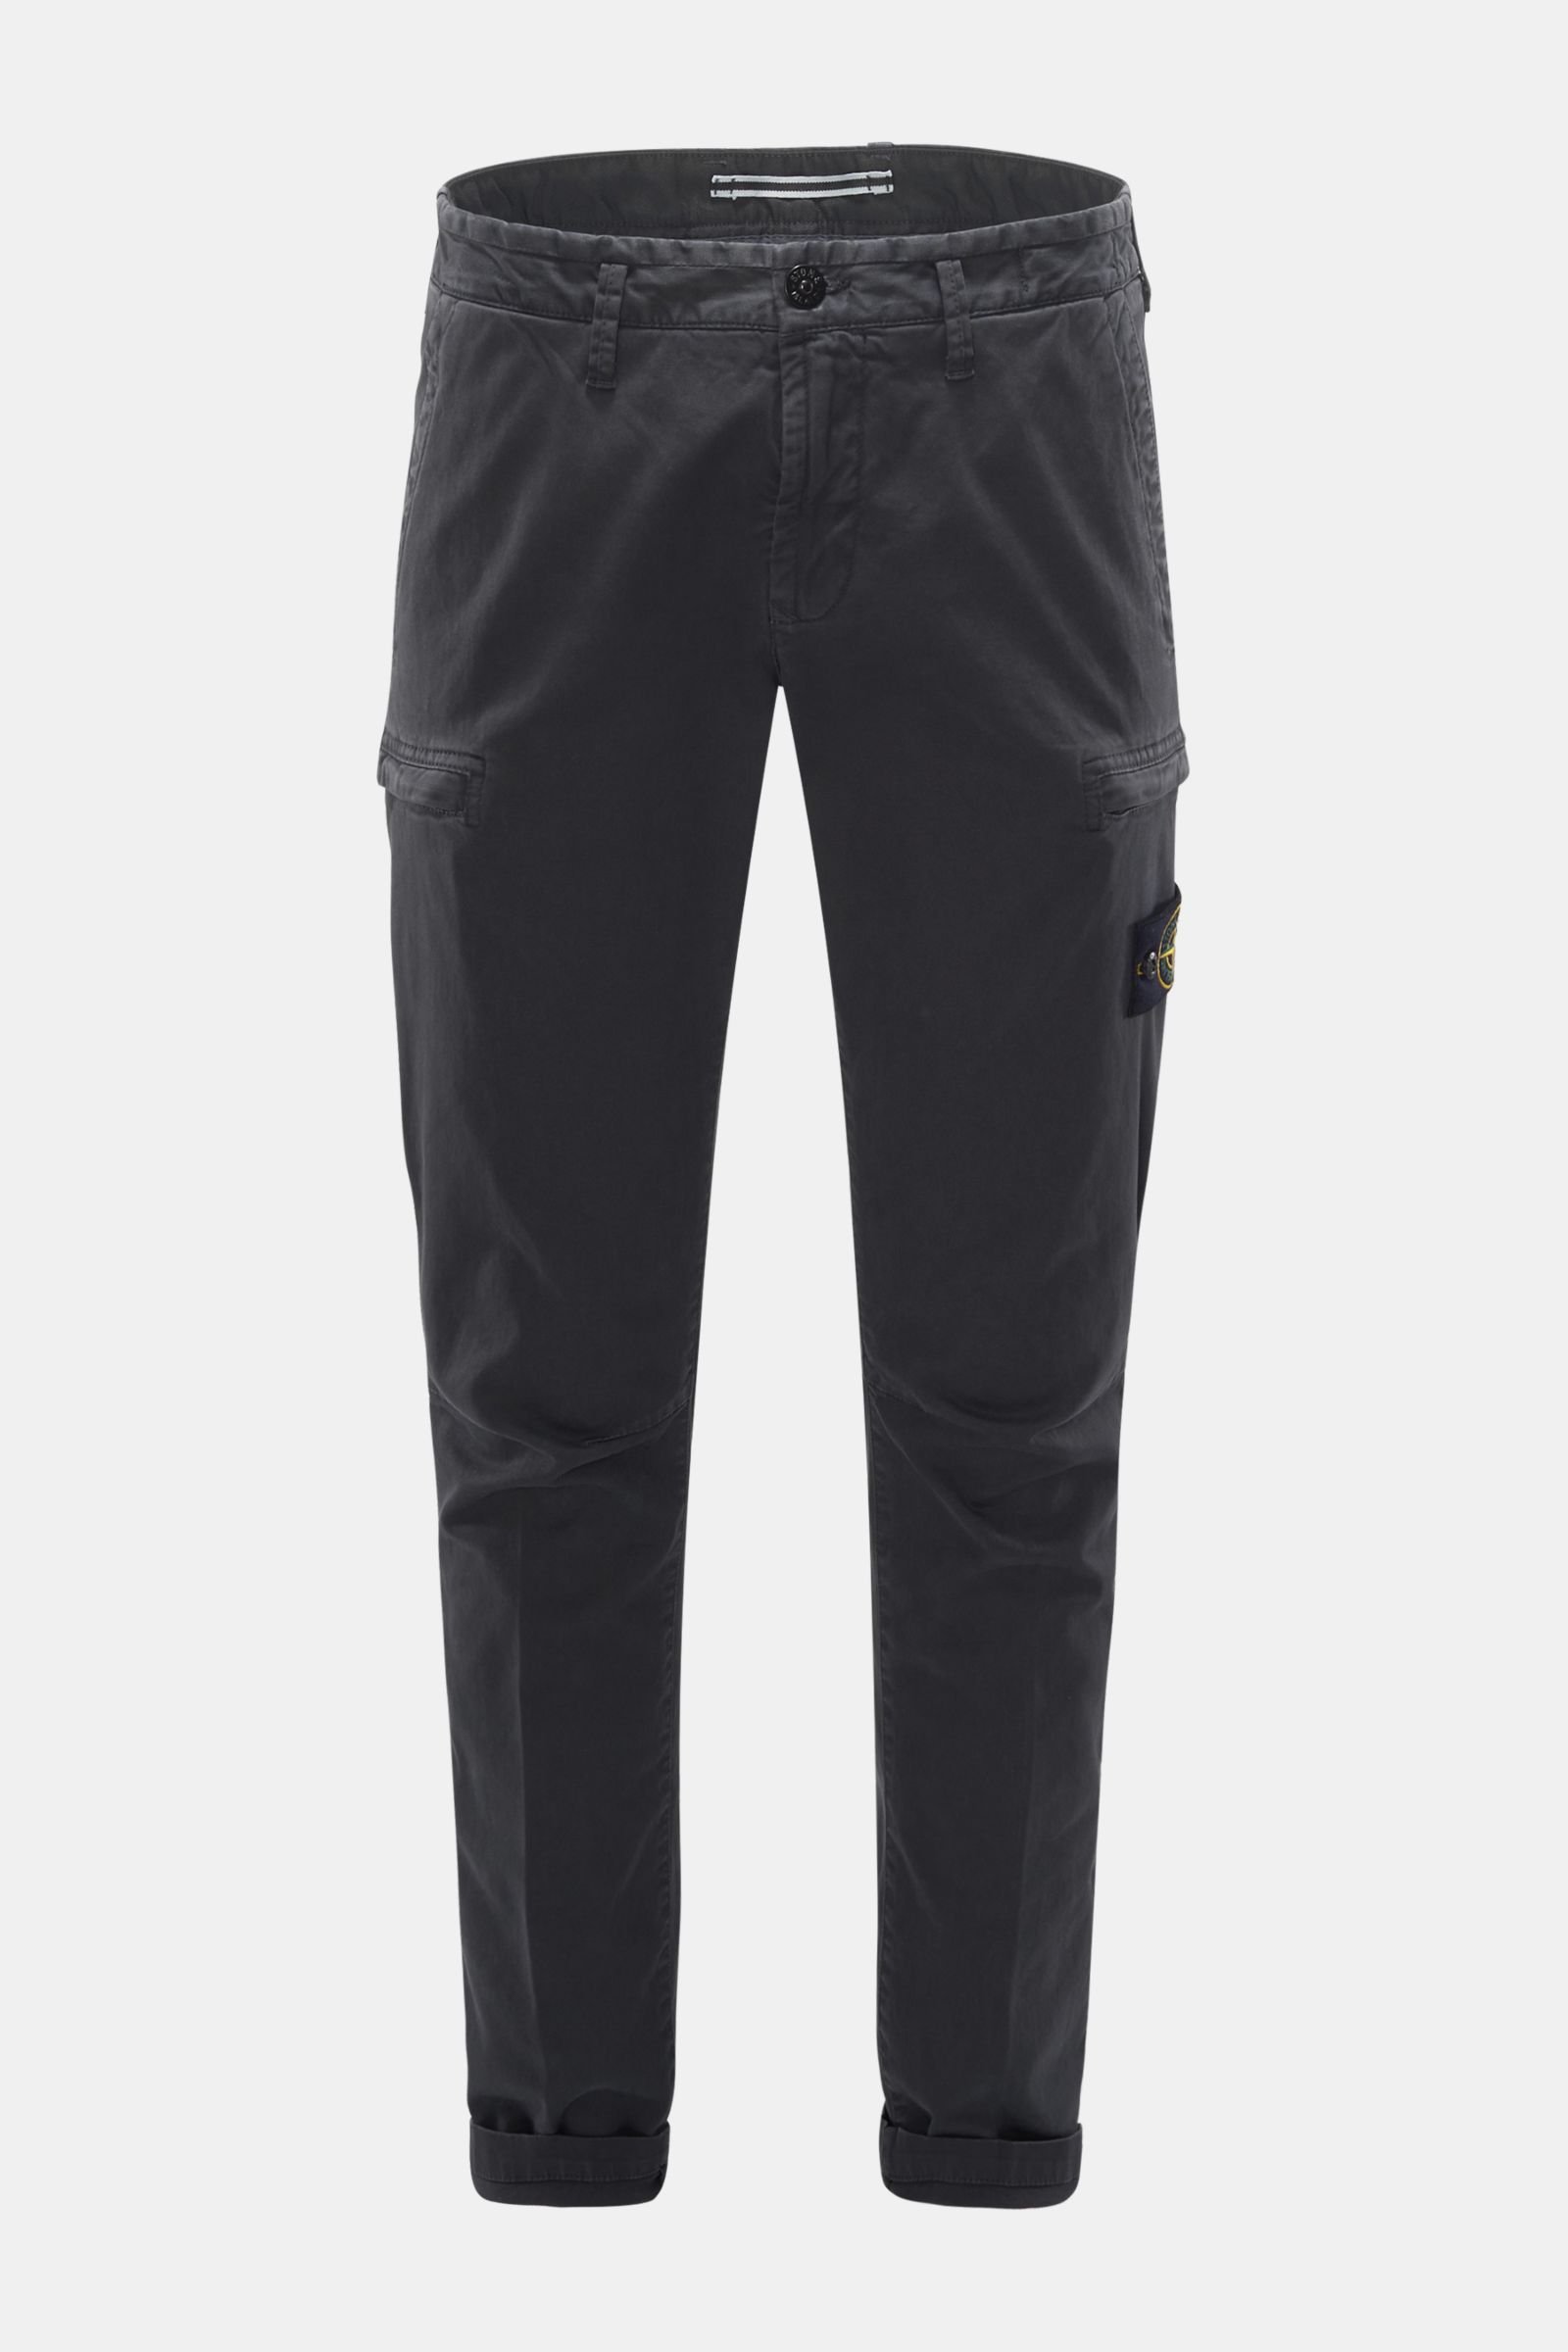 Cargo trousers navy